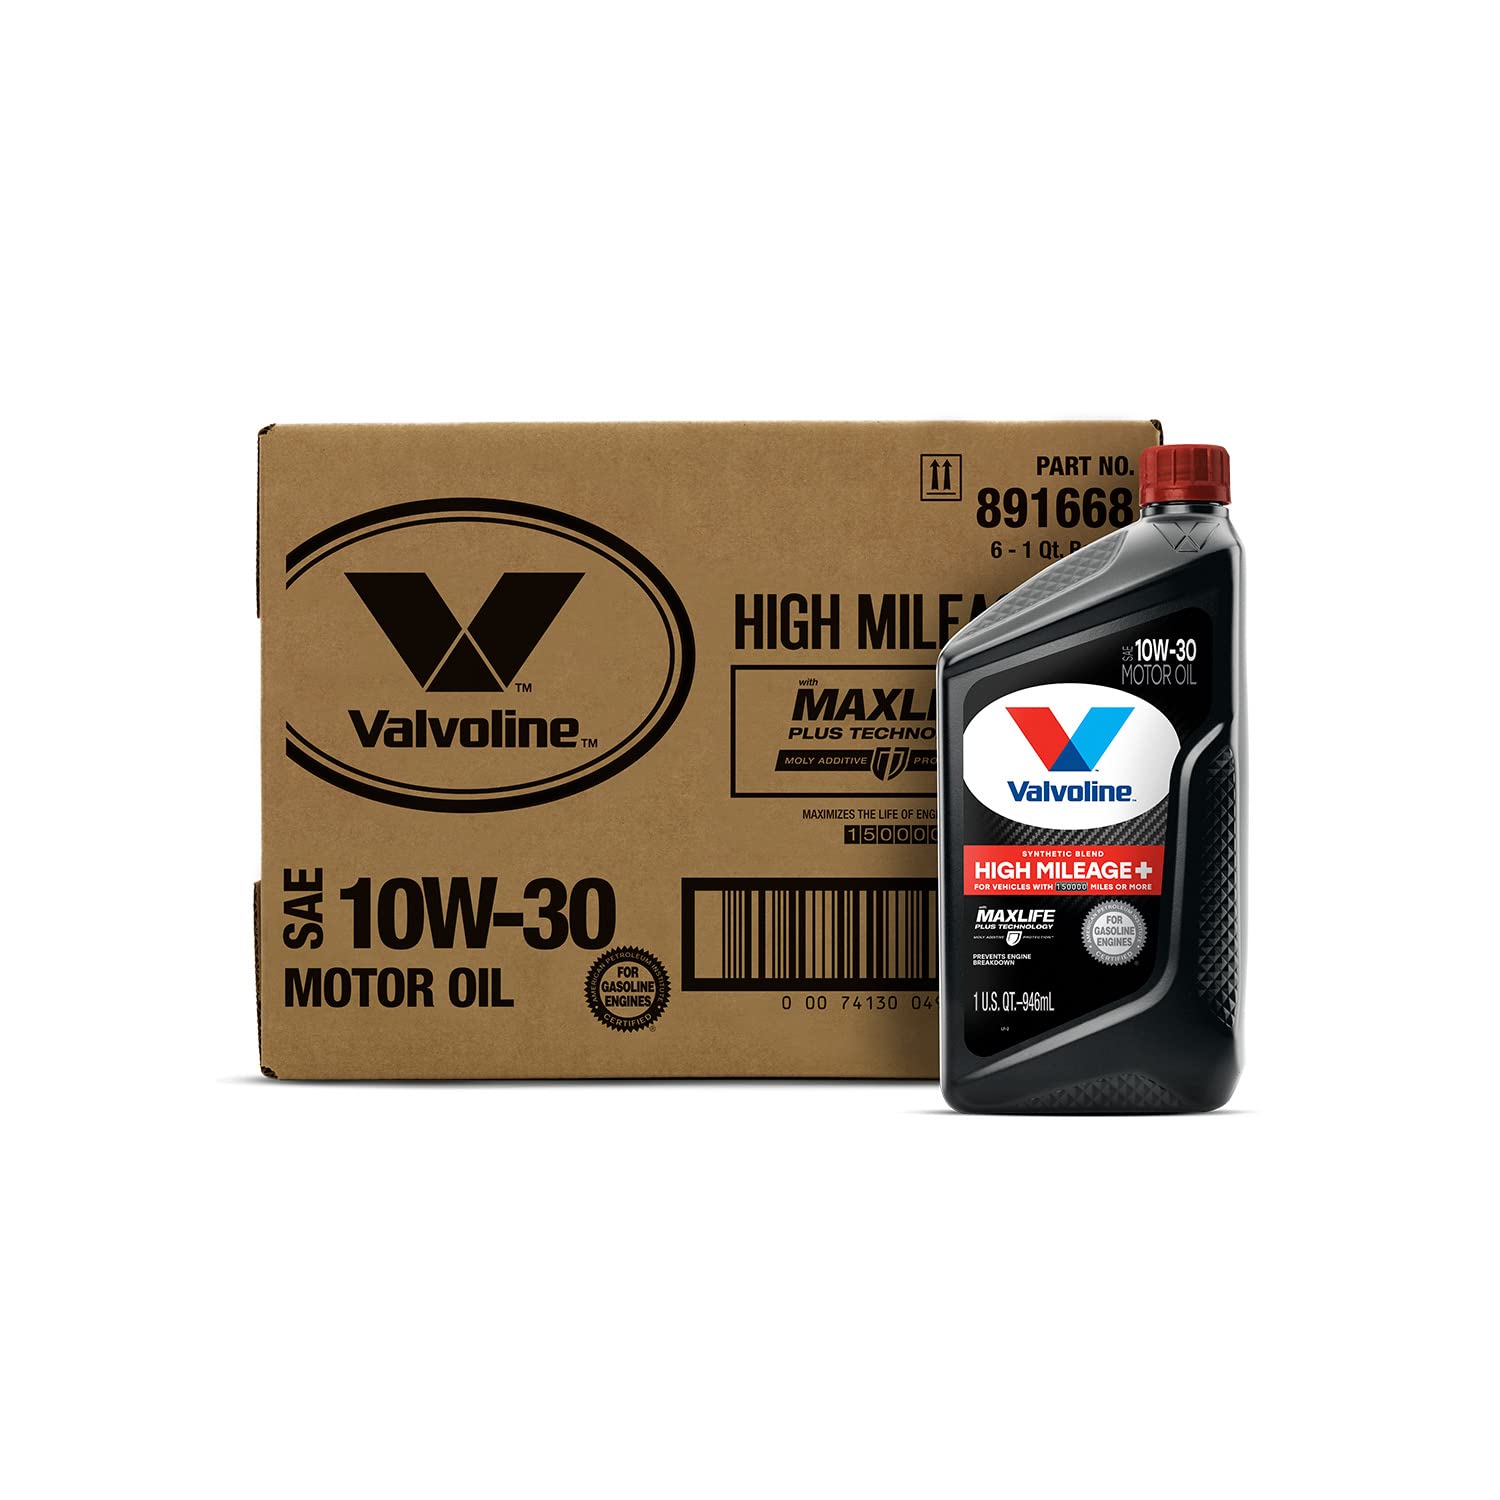 Valvoline High Mileage 150K with Maxlife Plus Technology Motor Oil SAE 10W-30 1 QT, case of 6